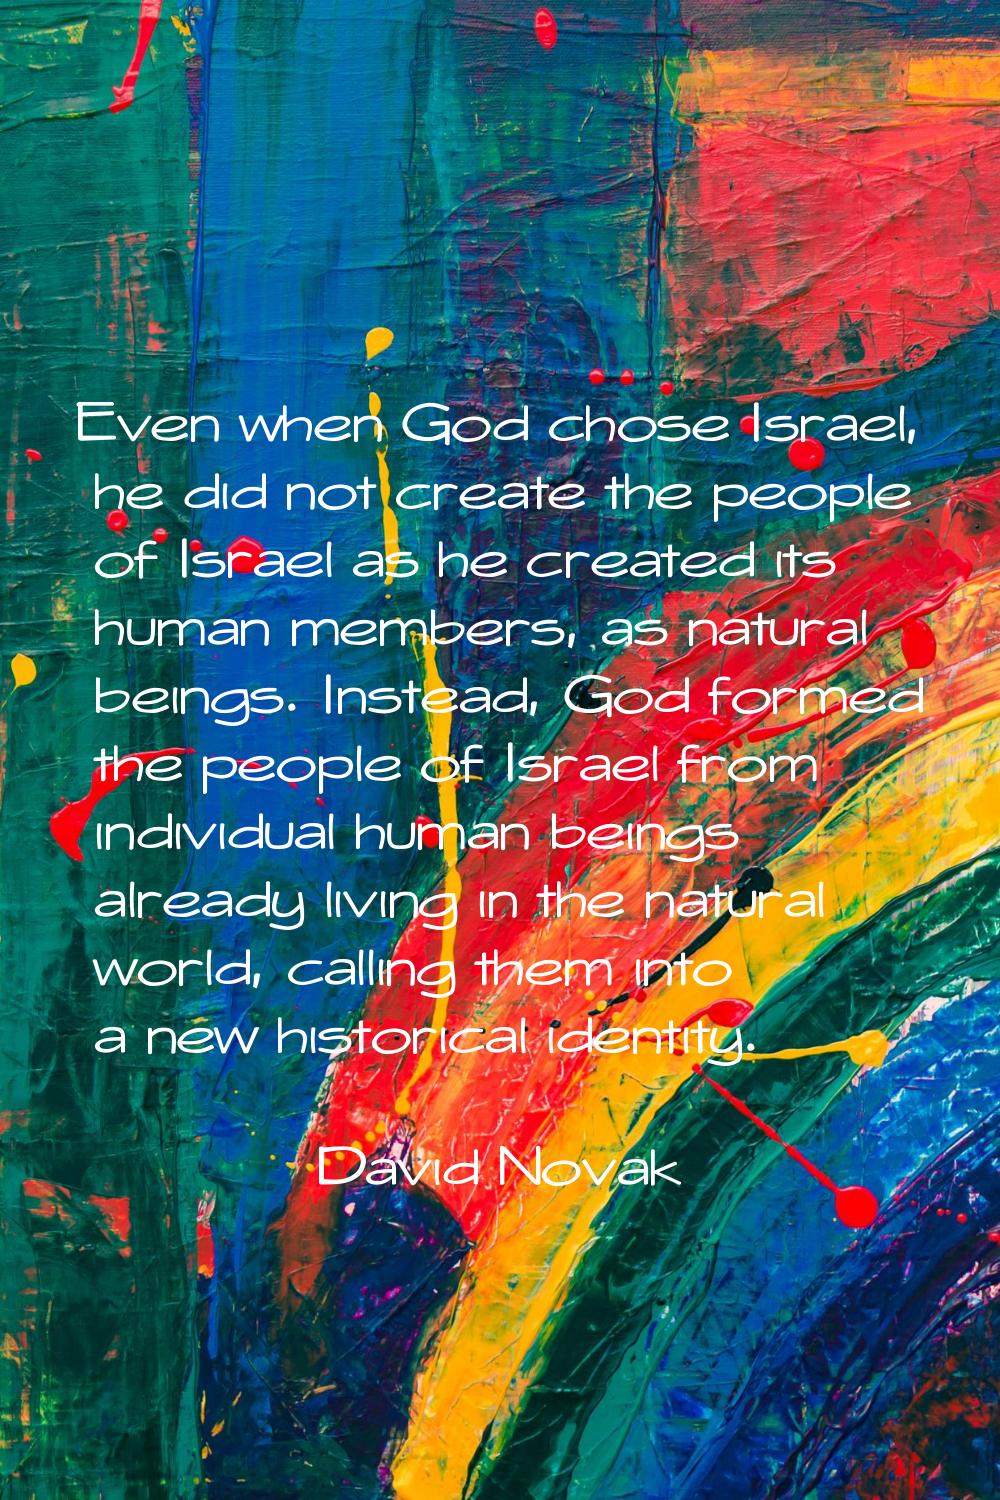 Even when God chose Israel, he did not create the people of Israel as he created its human members,